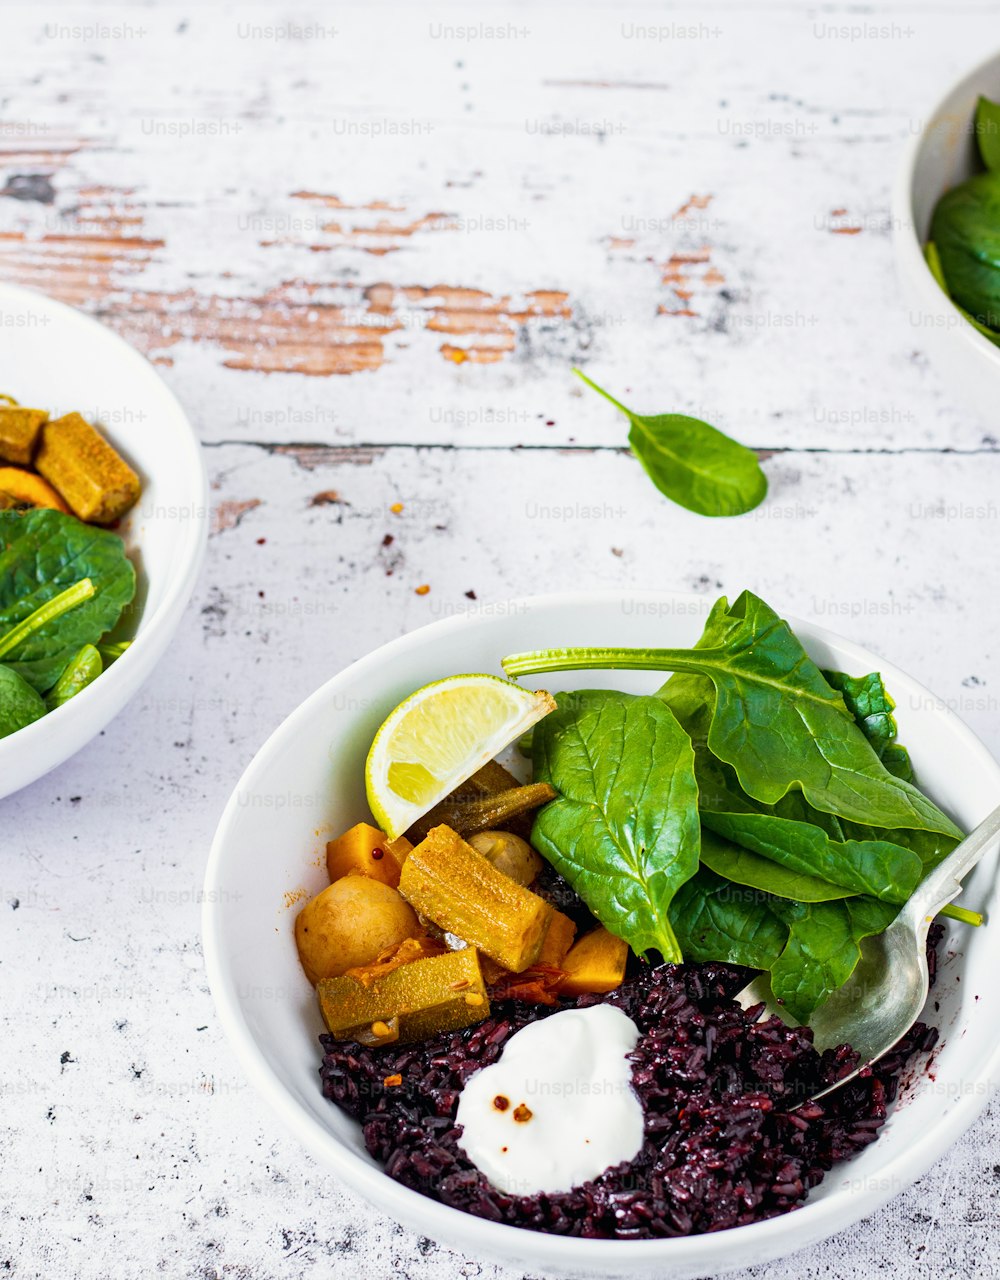 two bowls of food with spinach, tofu, and other vegetables